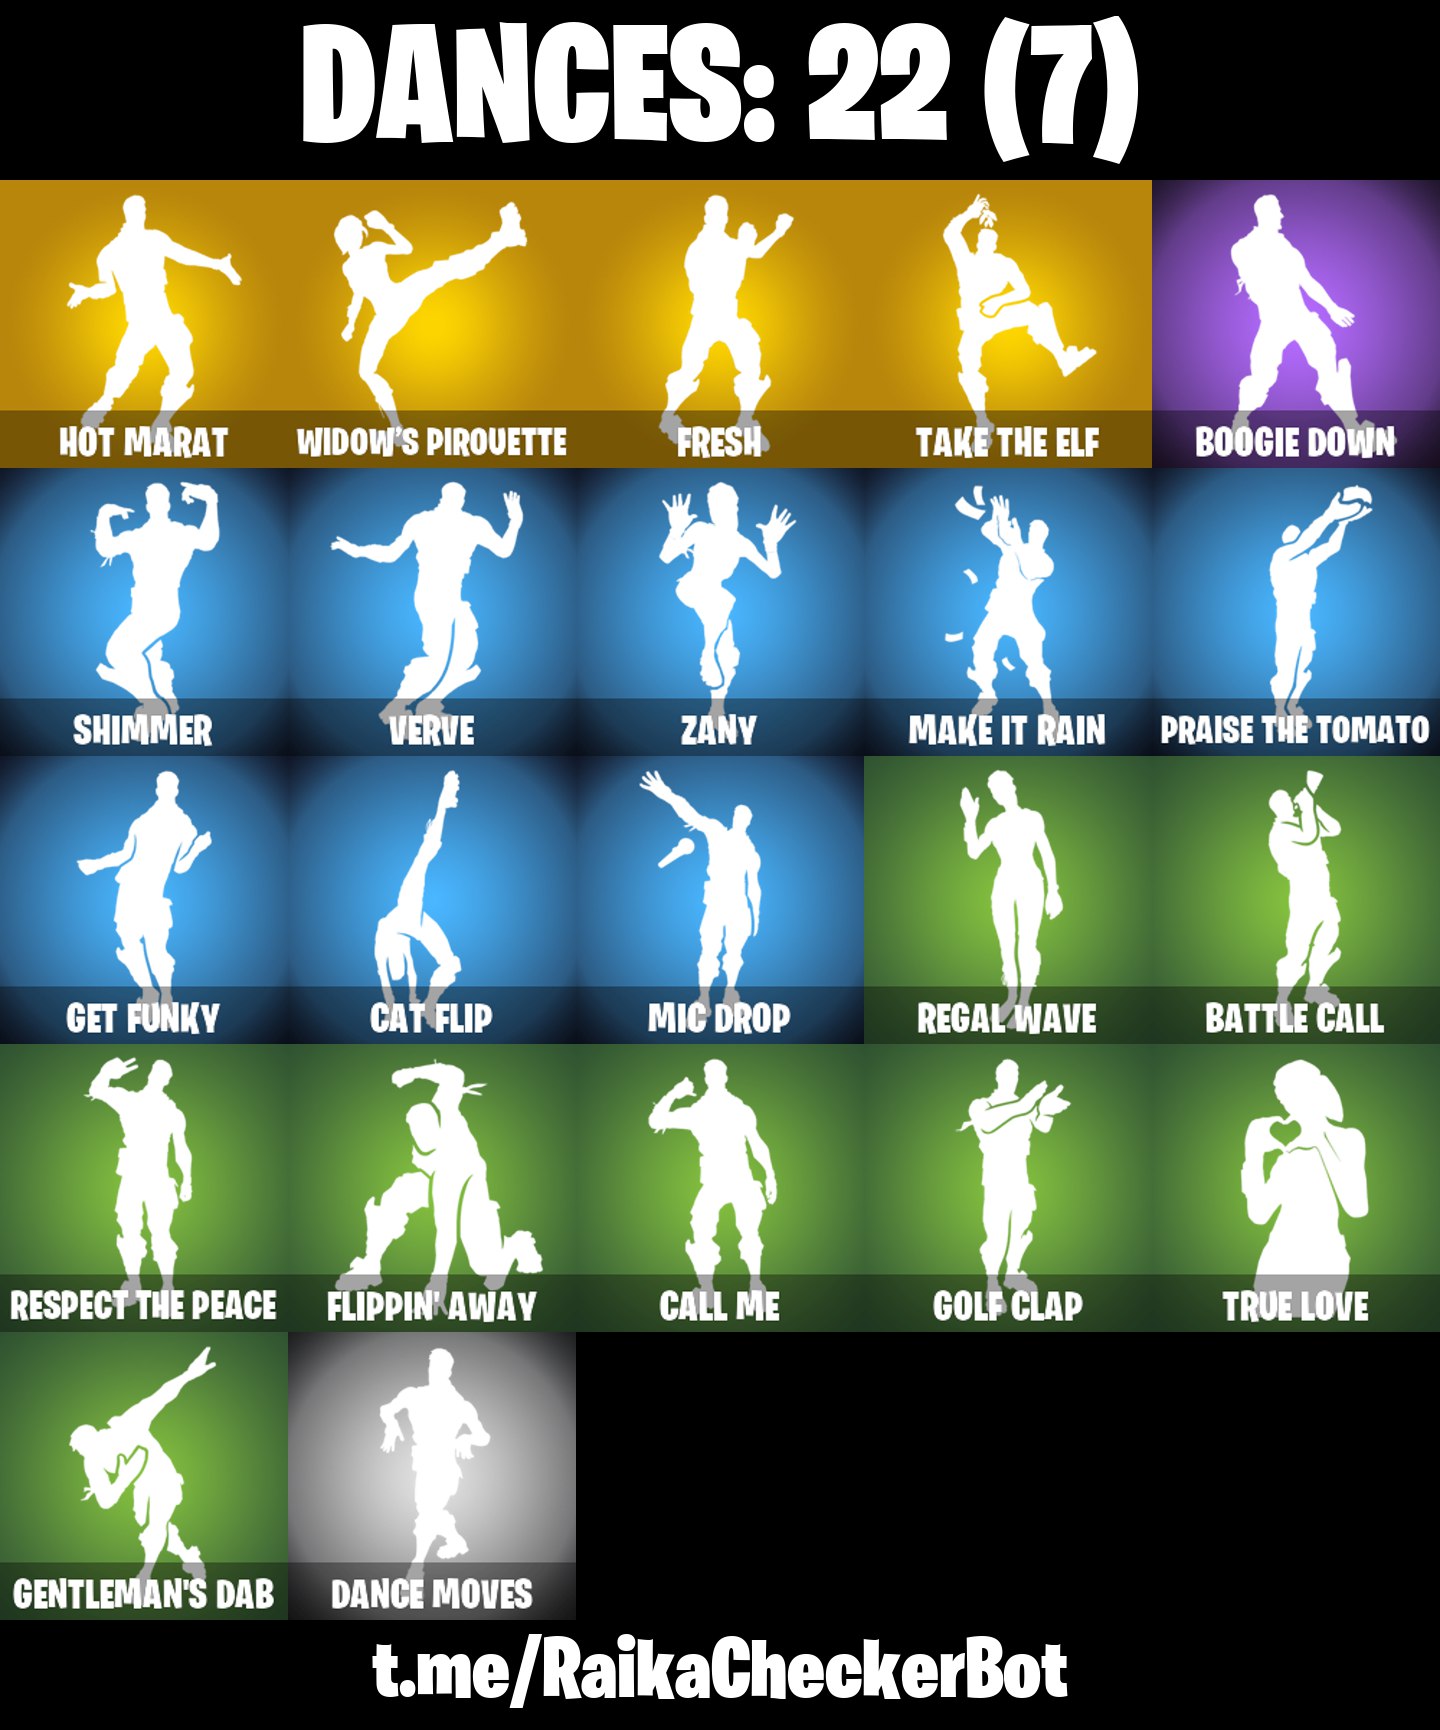 FA | 13 OUTFITS | HOT MARAT | WIDOW’S PIROUETTE | FRESH | TAKE THE ELF | LYNX (STAGE 3) | ZENITH (STAGE 4) | FROSTBITE